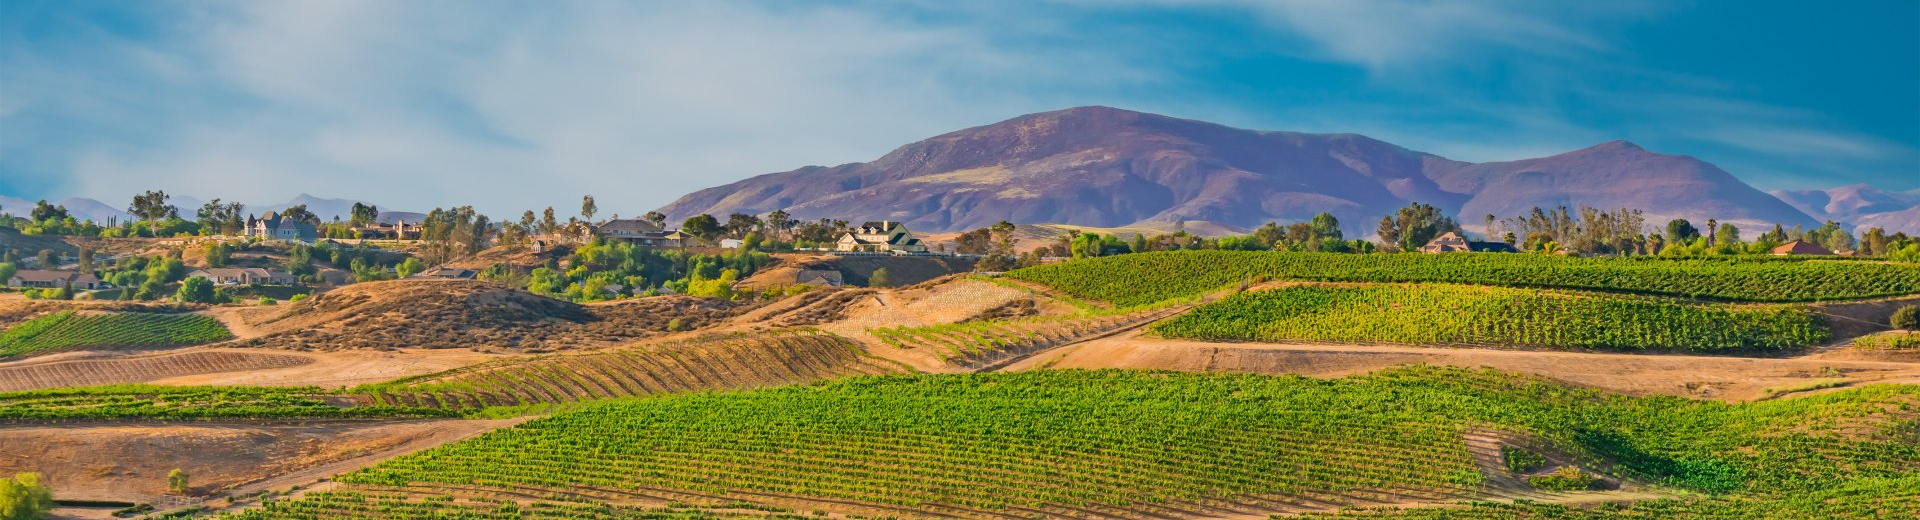 Limo Winery Tours Temecula